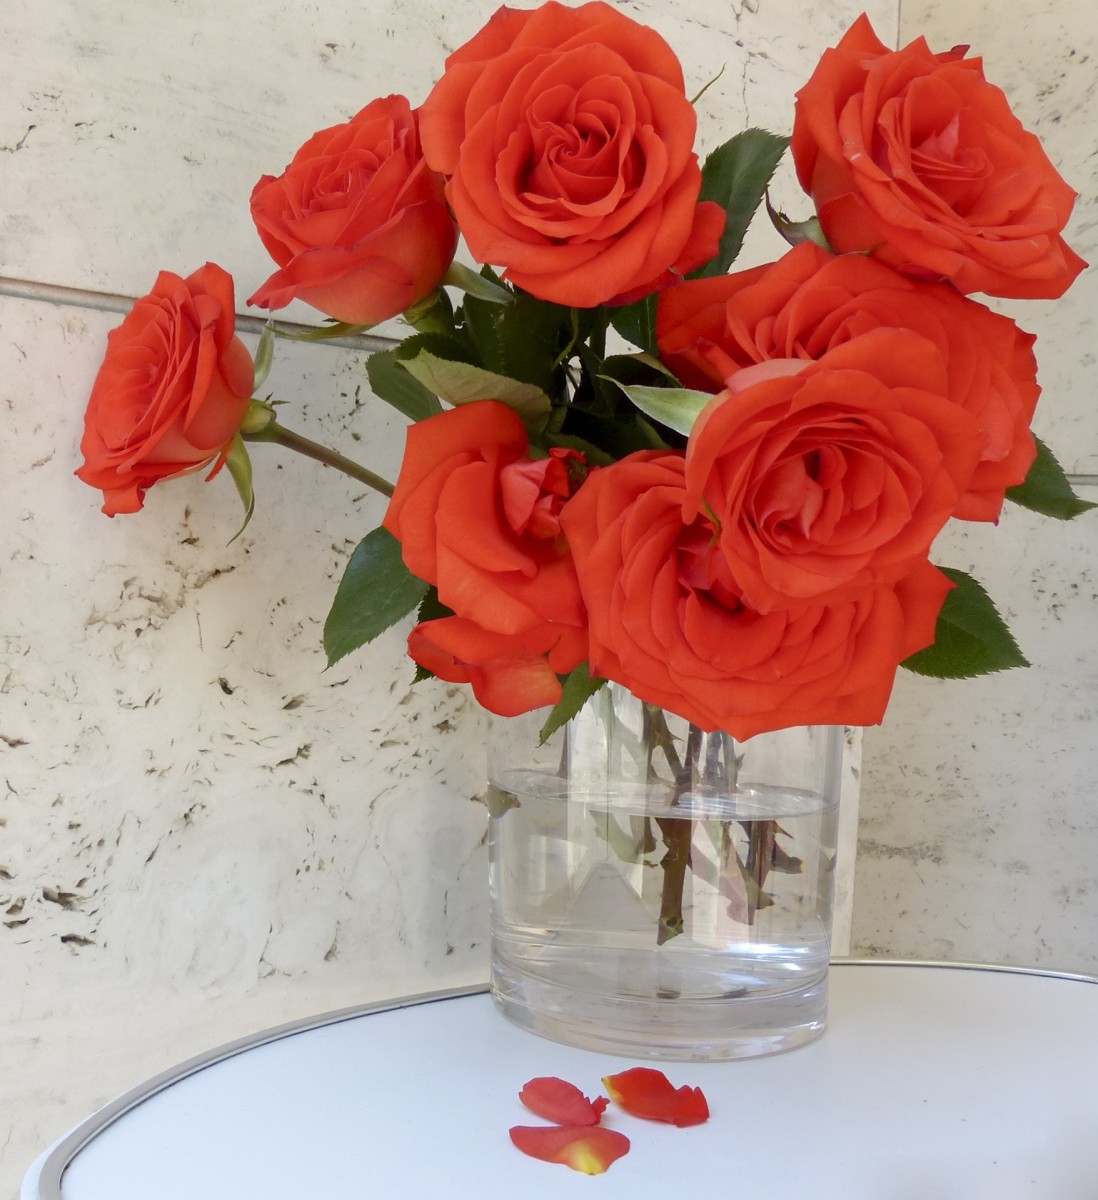 Roses Standing Proudly in a Vase; A Lovely Floral Display: Poetry